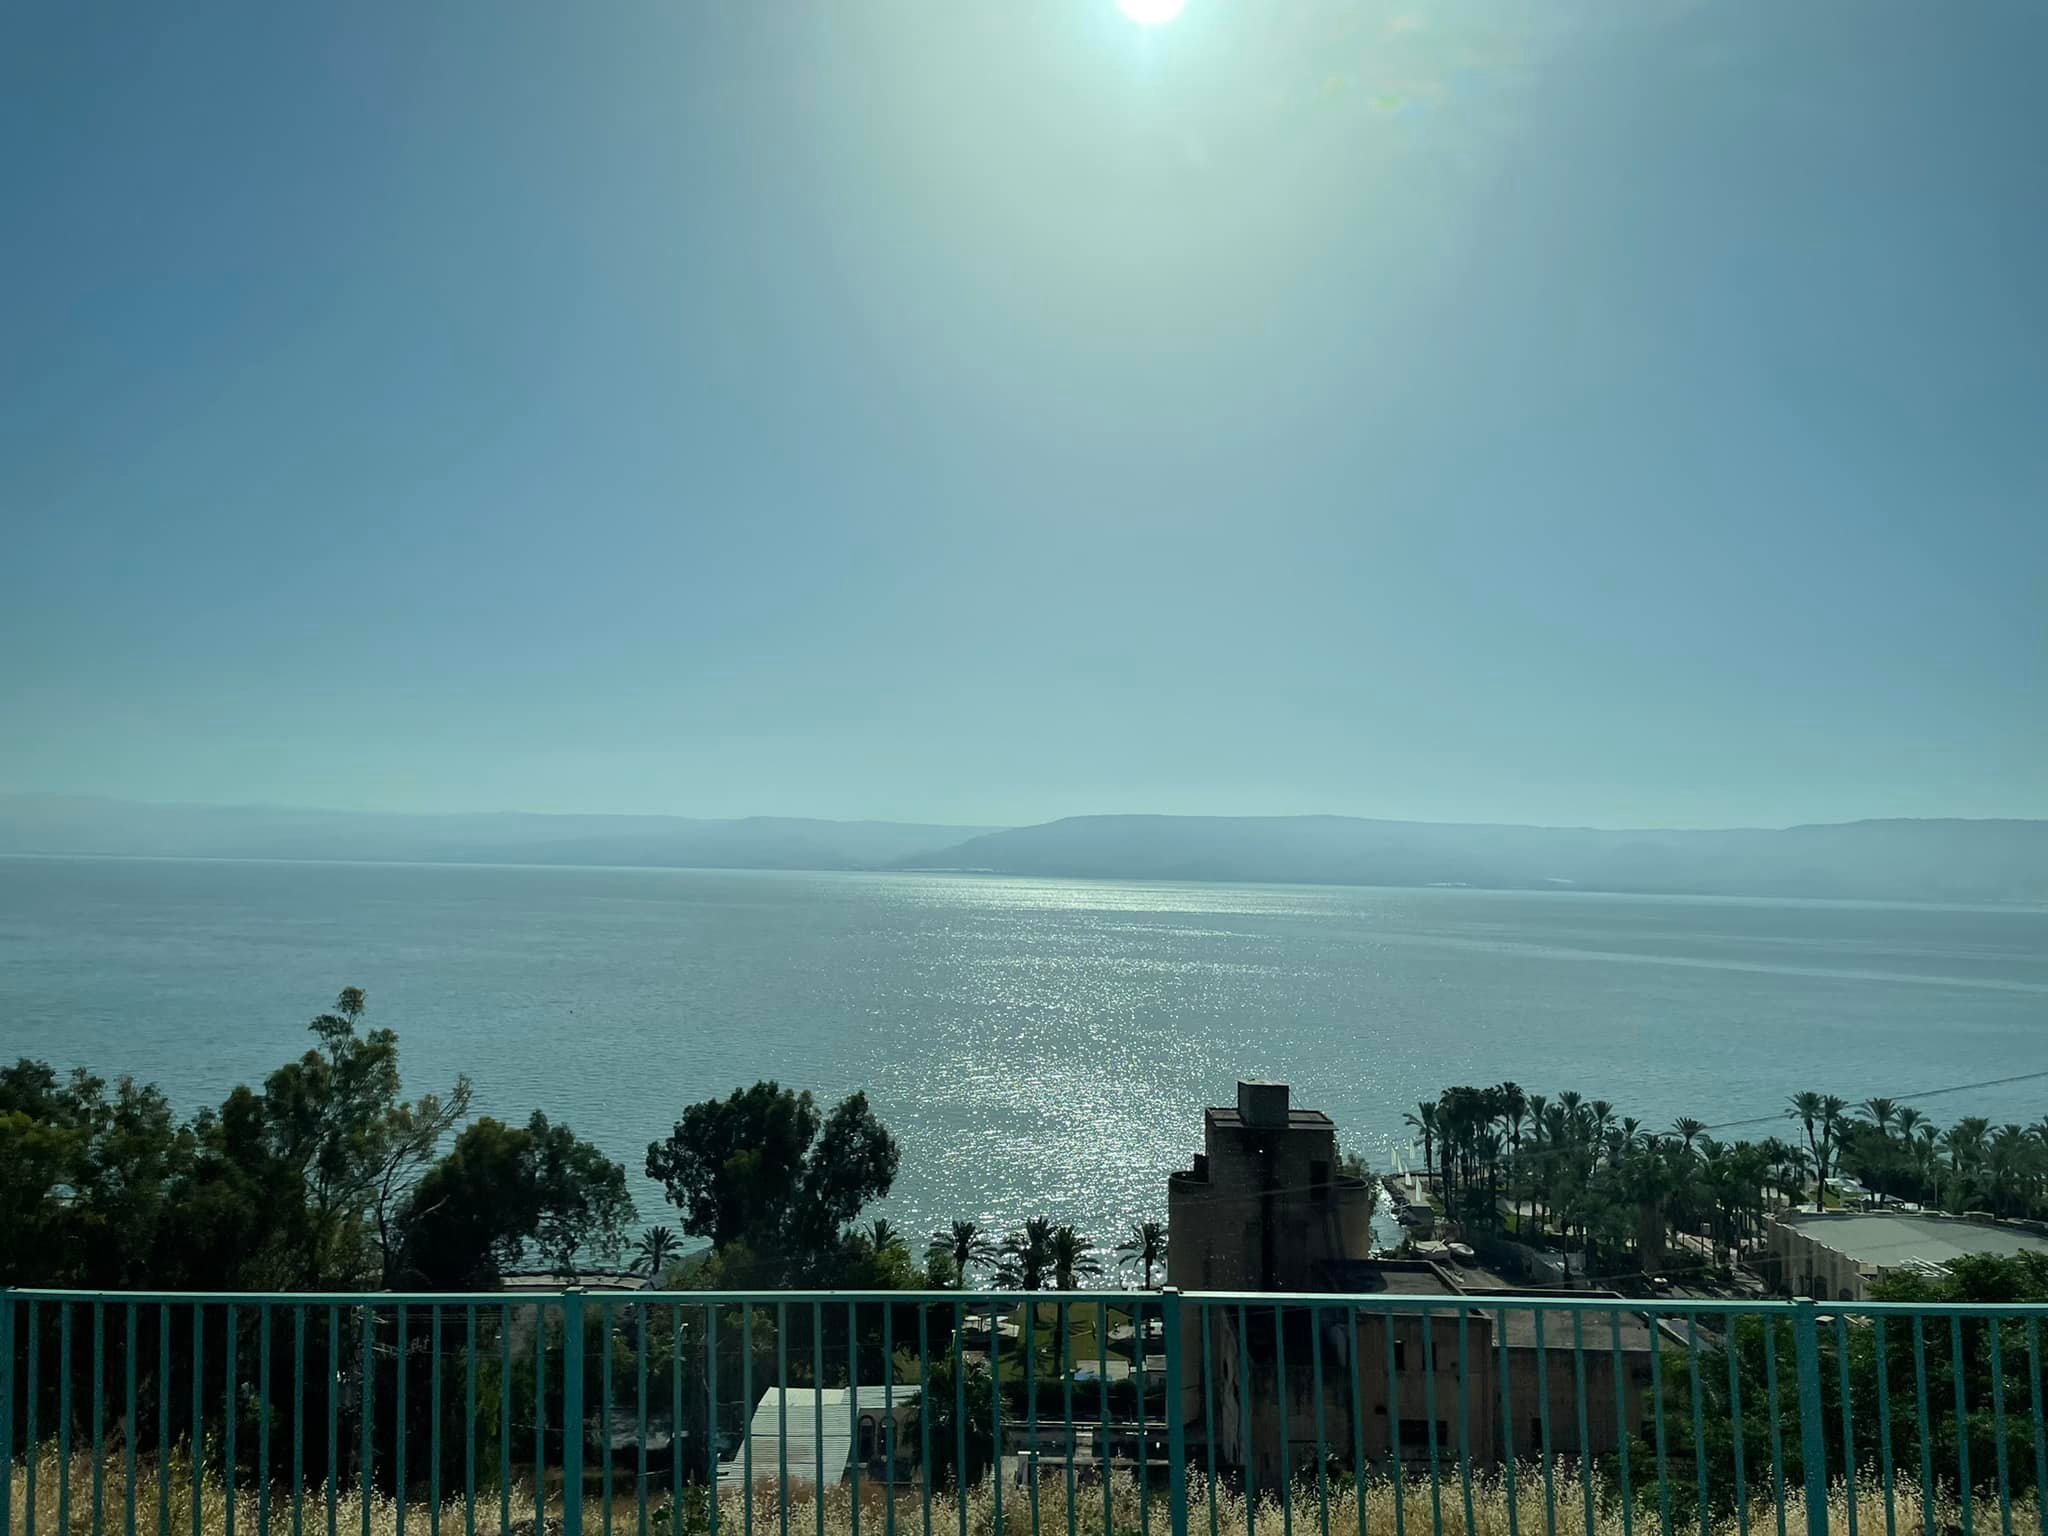  We began with a drive up the west coast of the Sea of Galilee, here coming into Tiberias. Beautiful morning! 